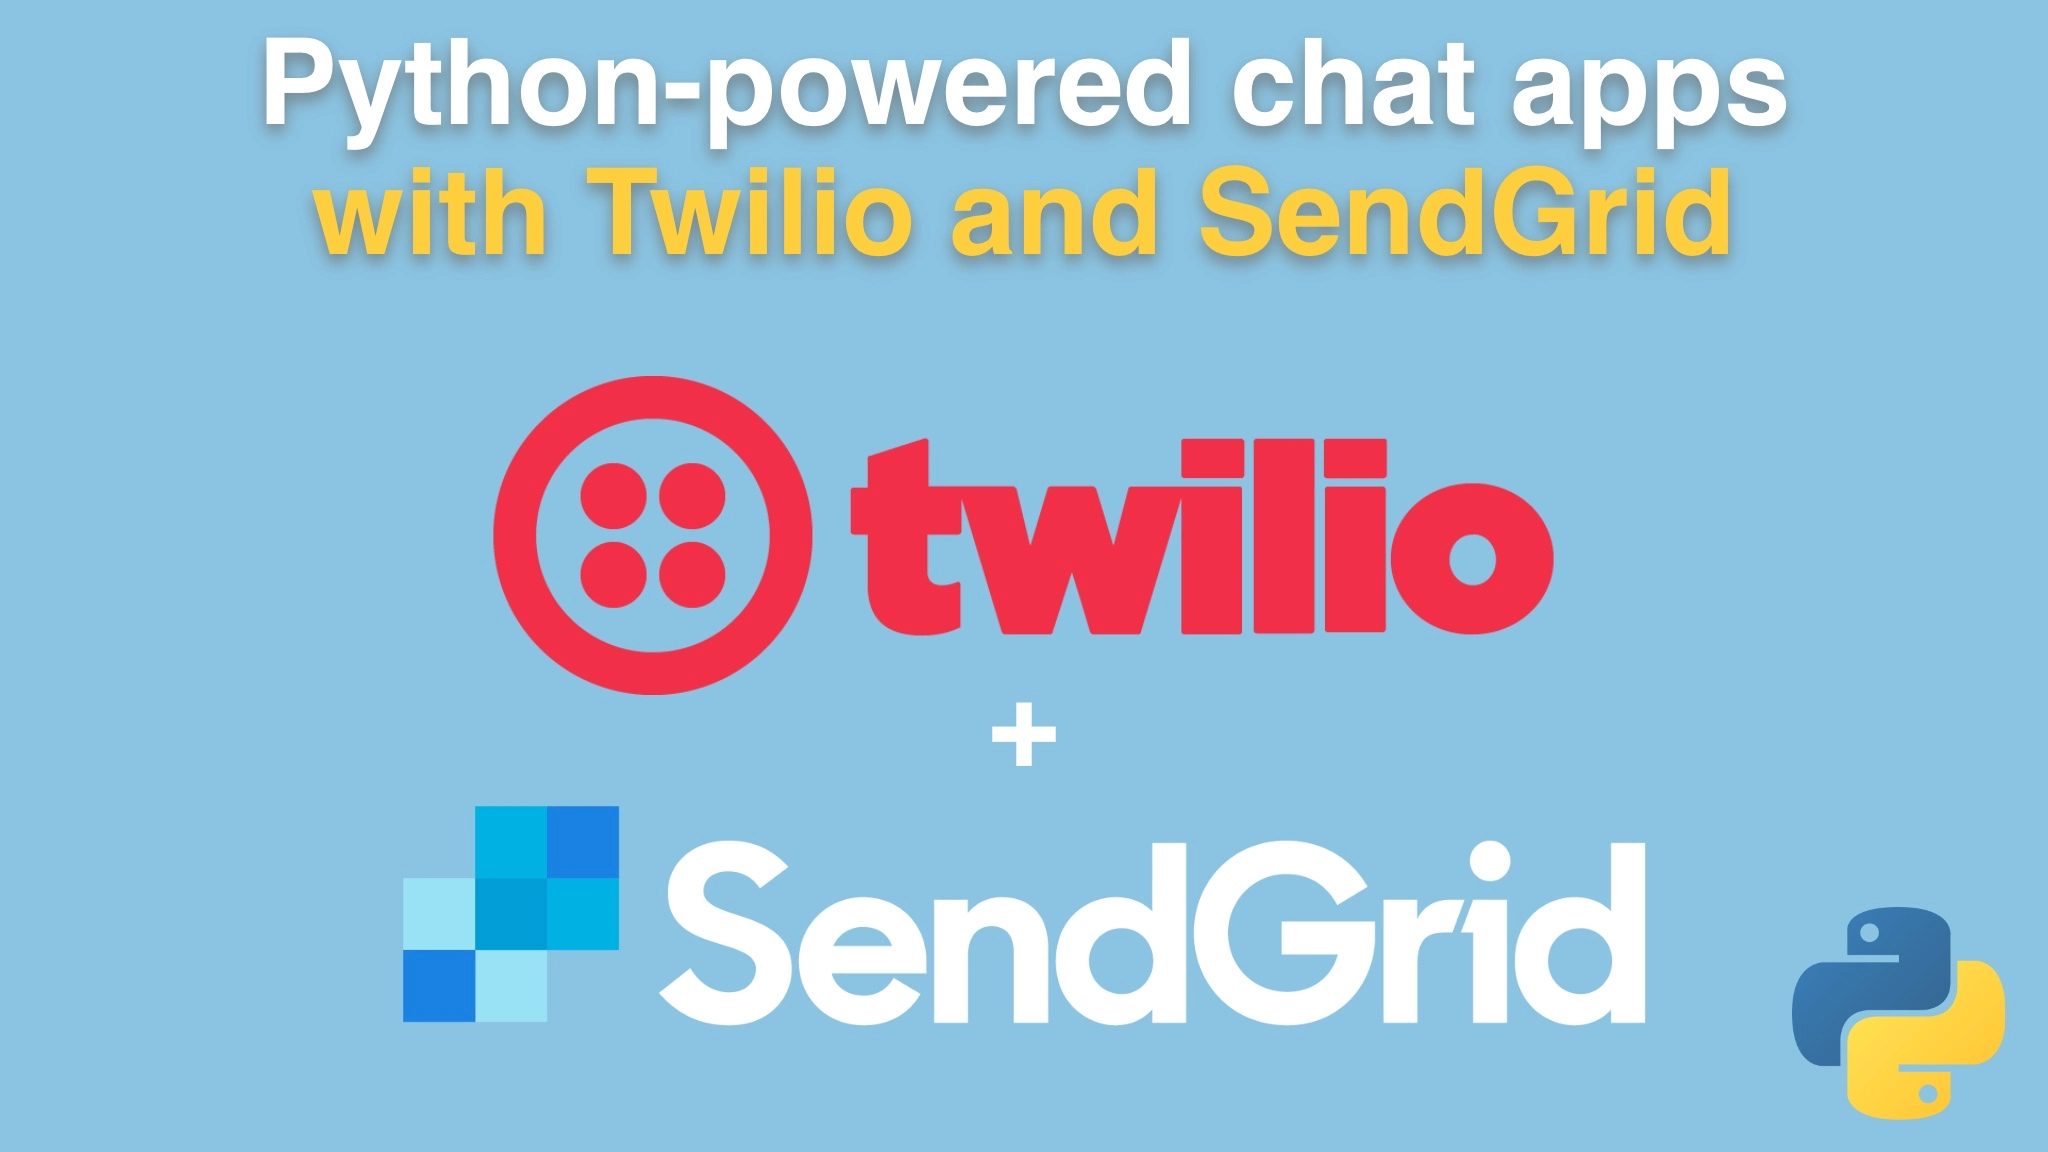 Course: Python-powered chat apps with Twilio and SendGrid